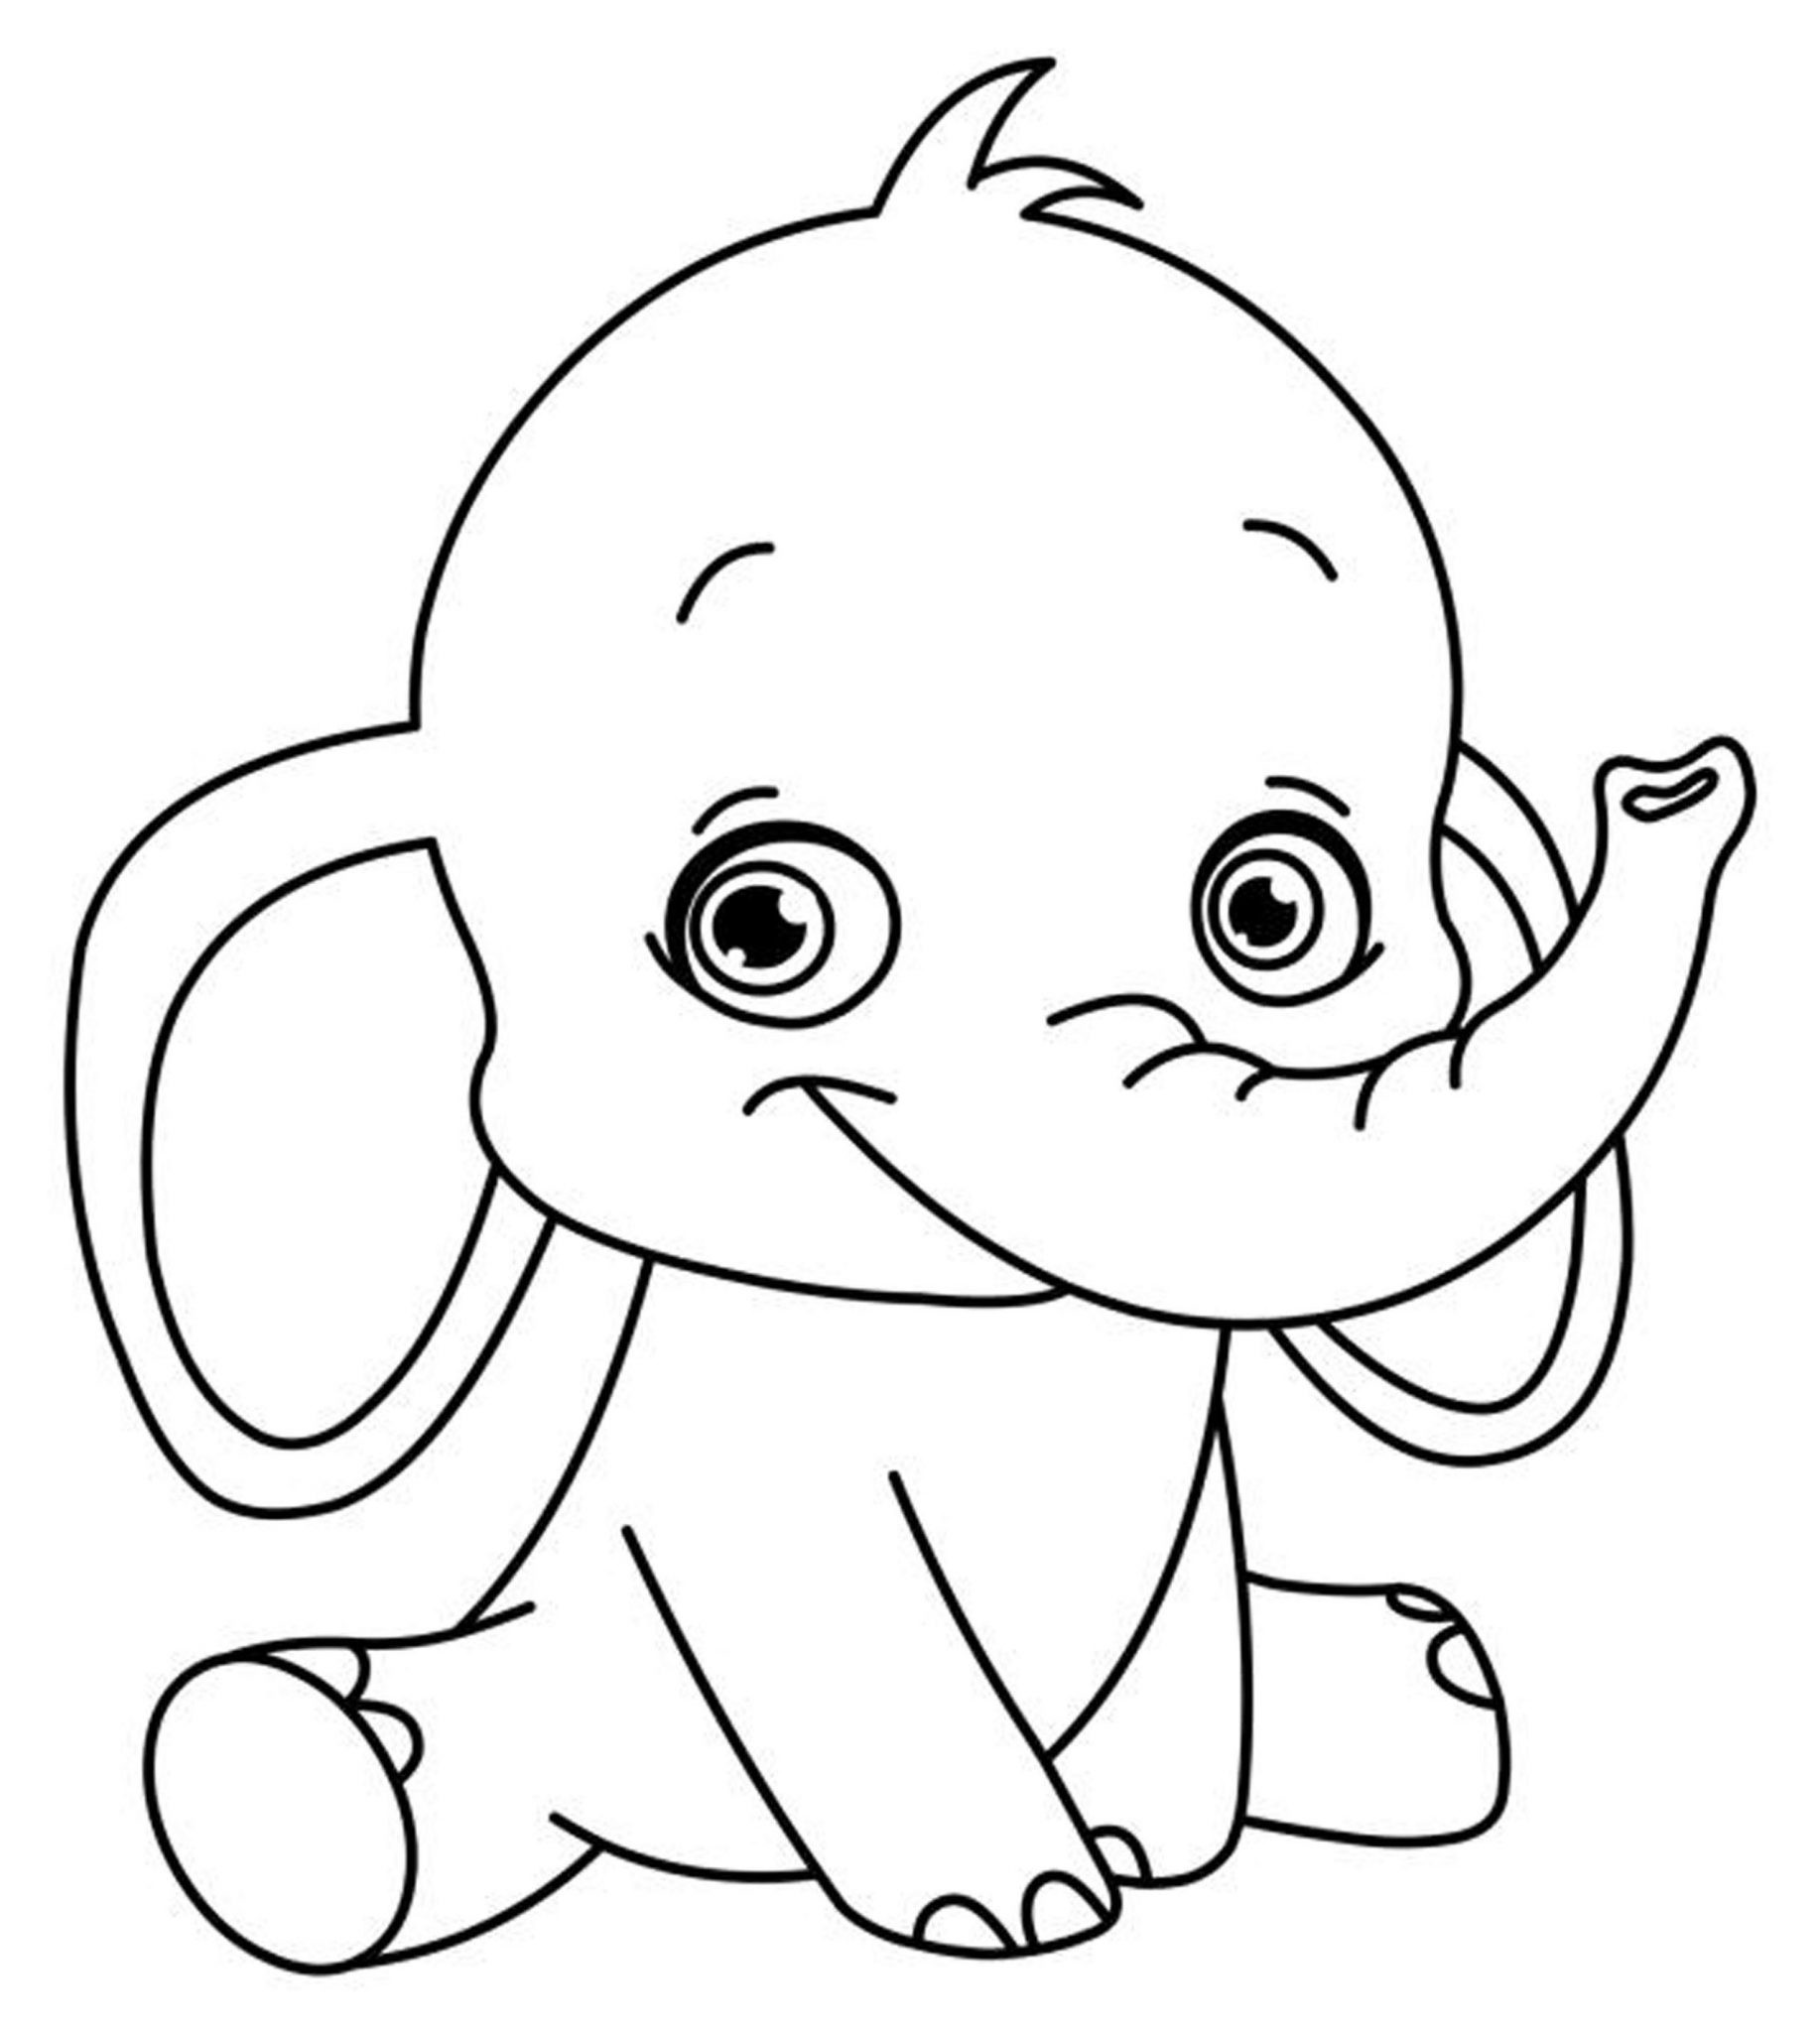 Free Disney Coloring Pages For Kids
 33 Free Disney Coloring Pages for Kids